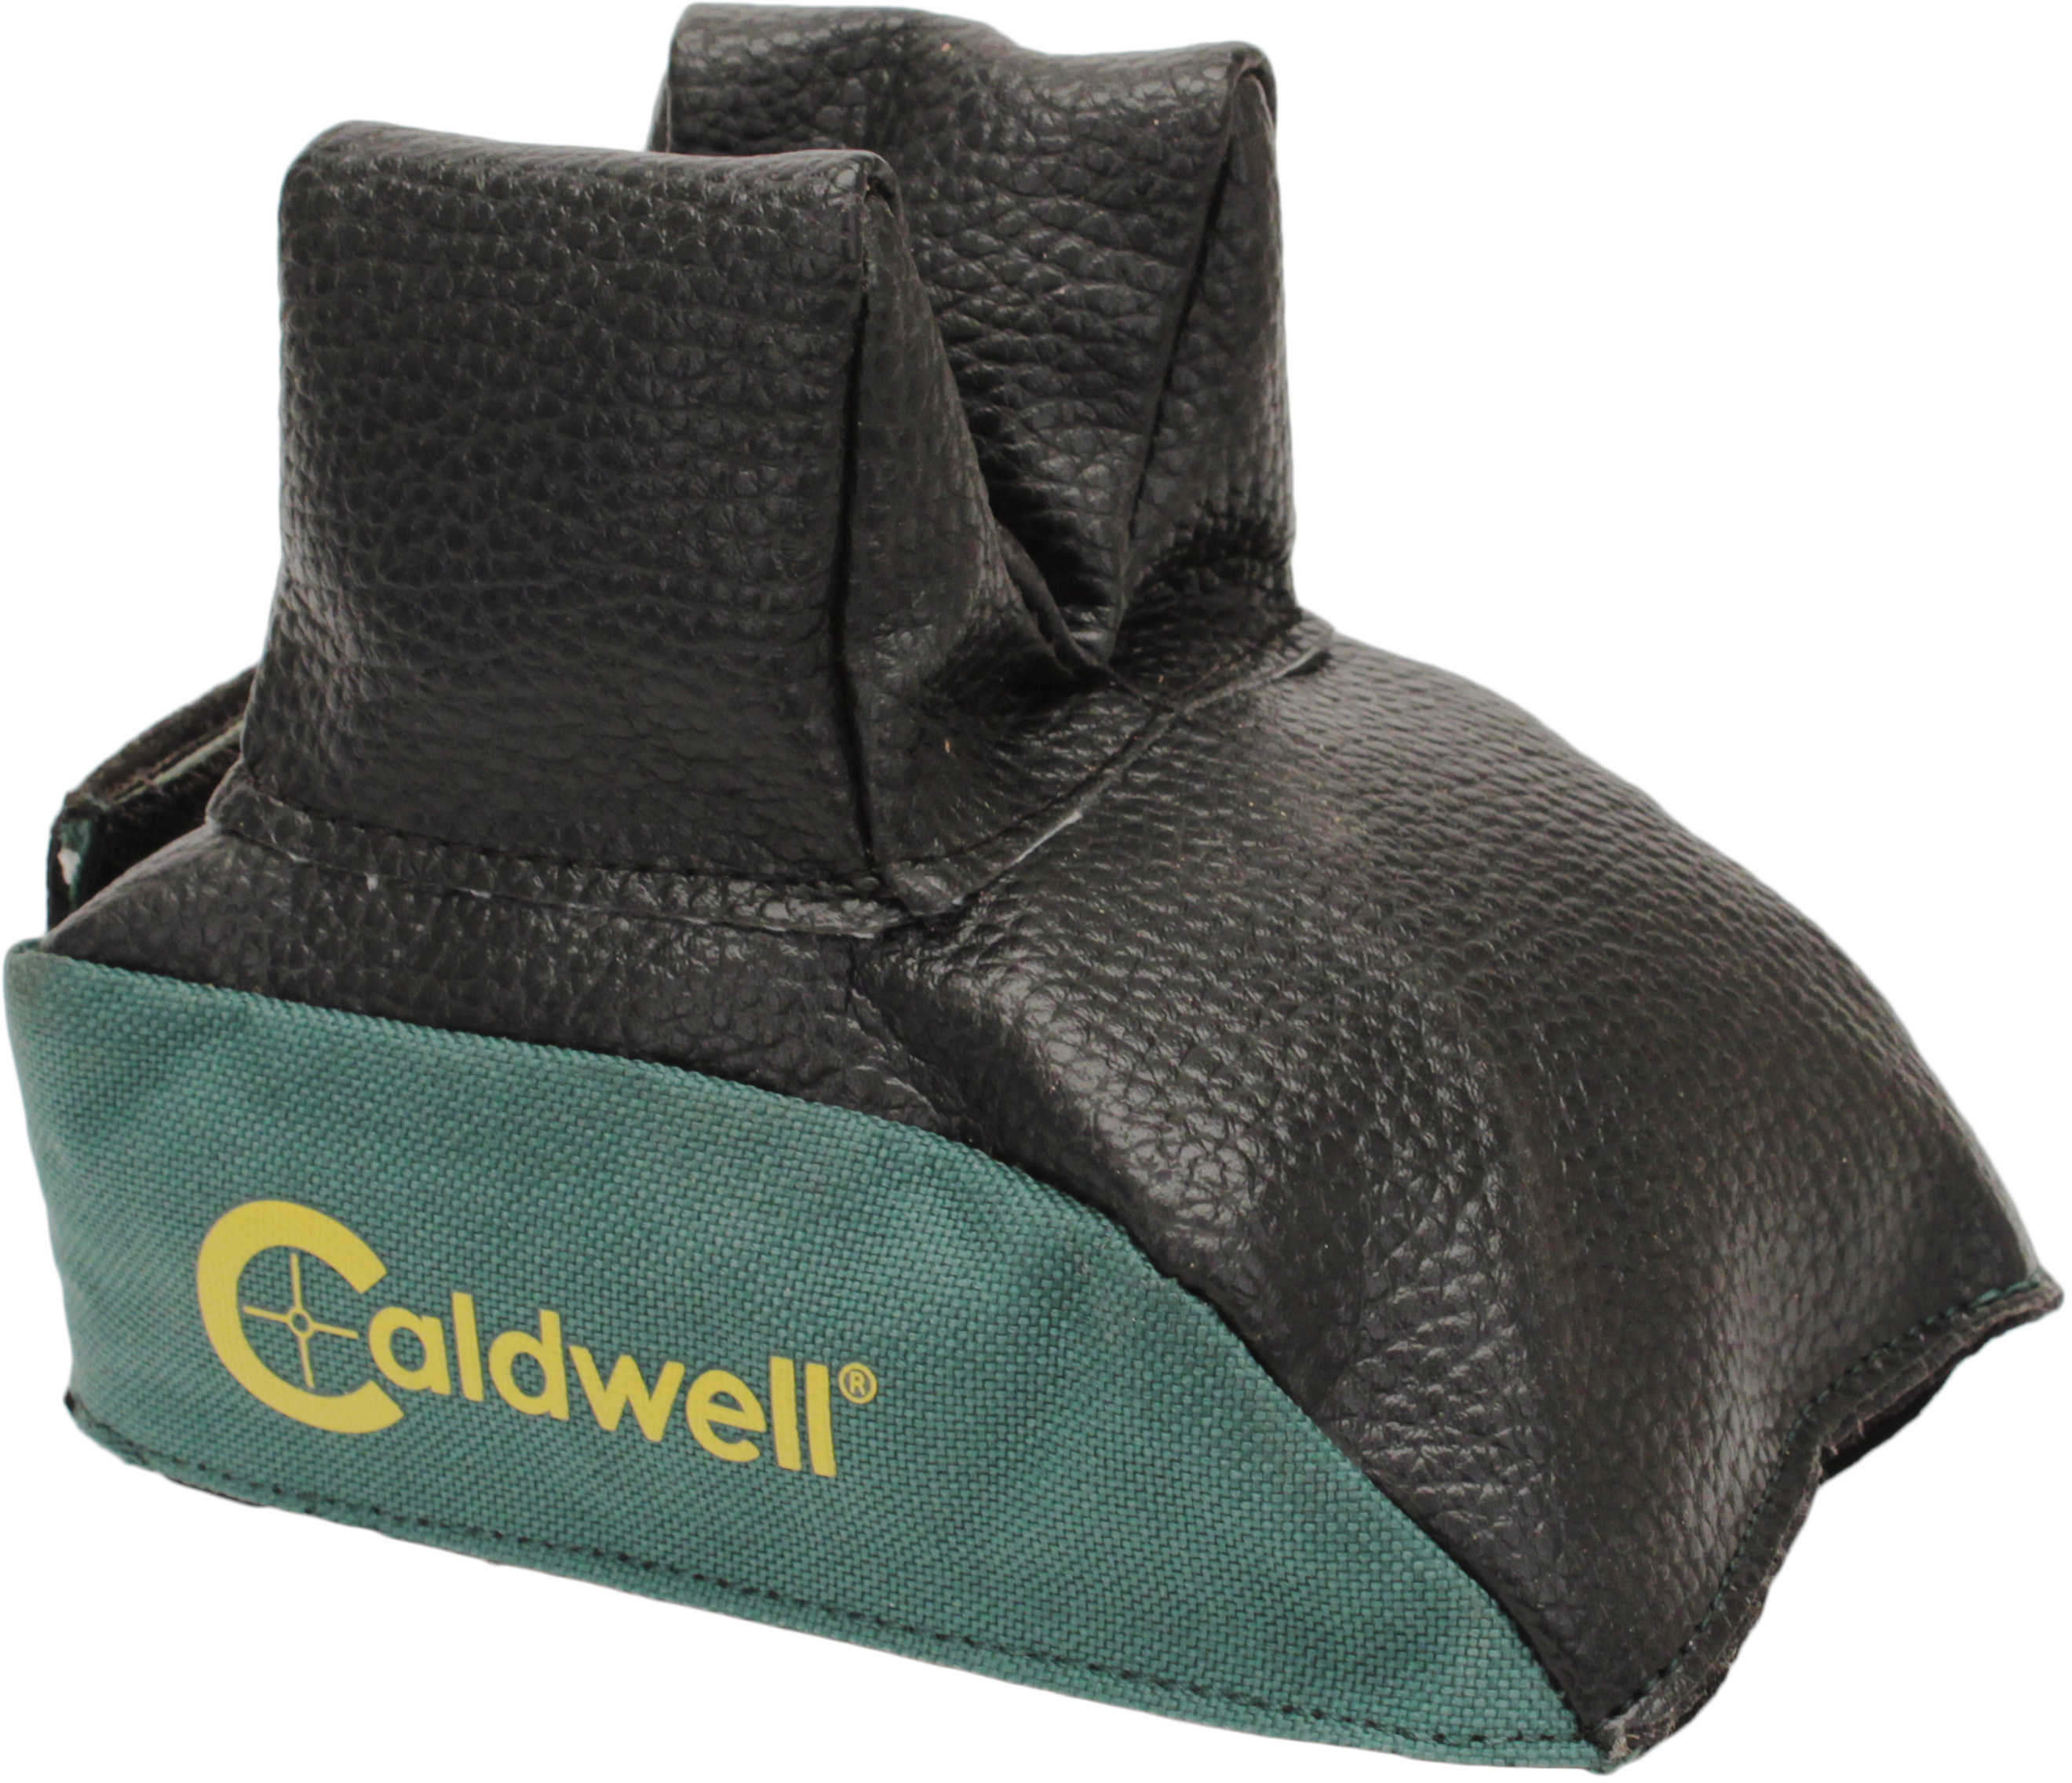 Caldwell Black Leather Rear Shooting Bench Rest Bag Md: 226645